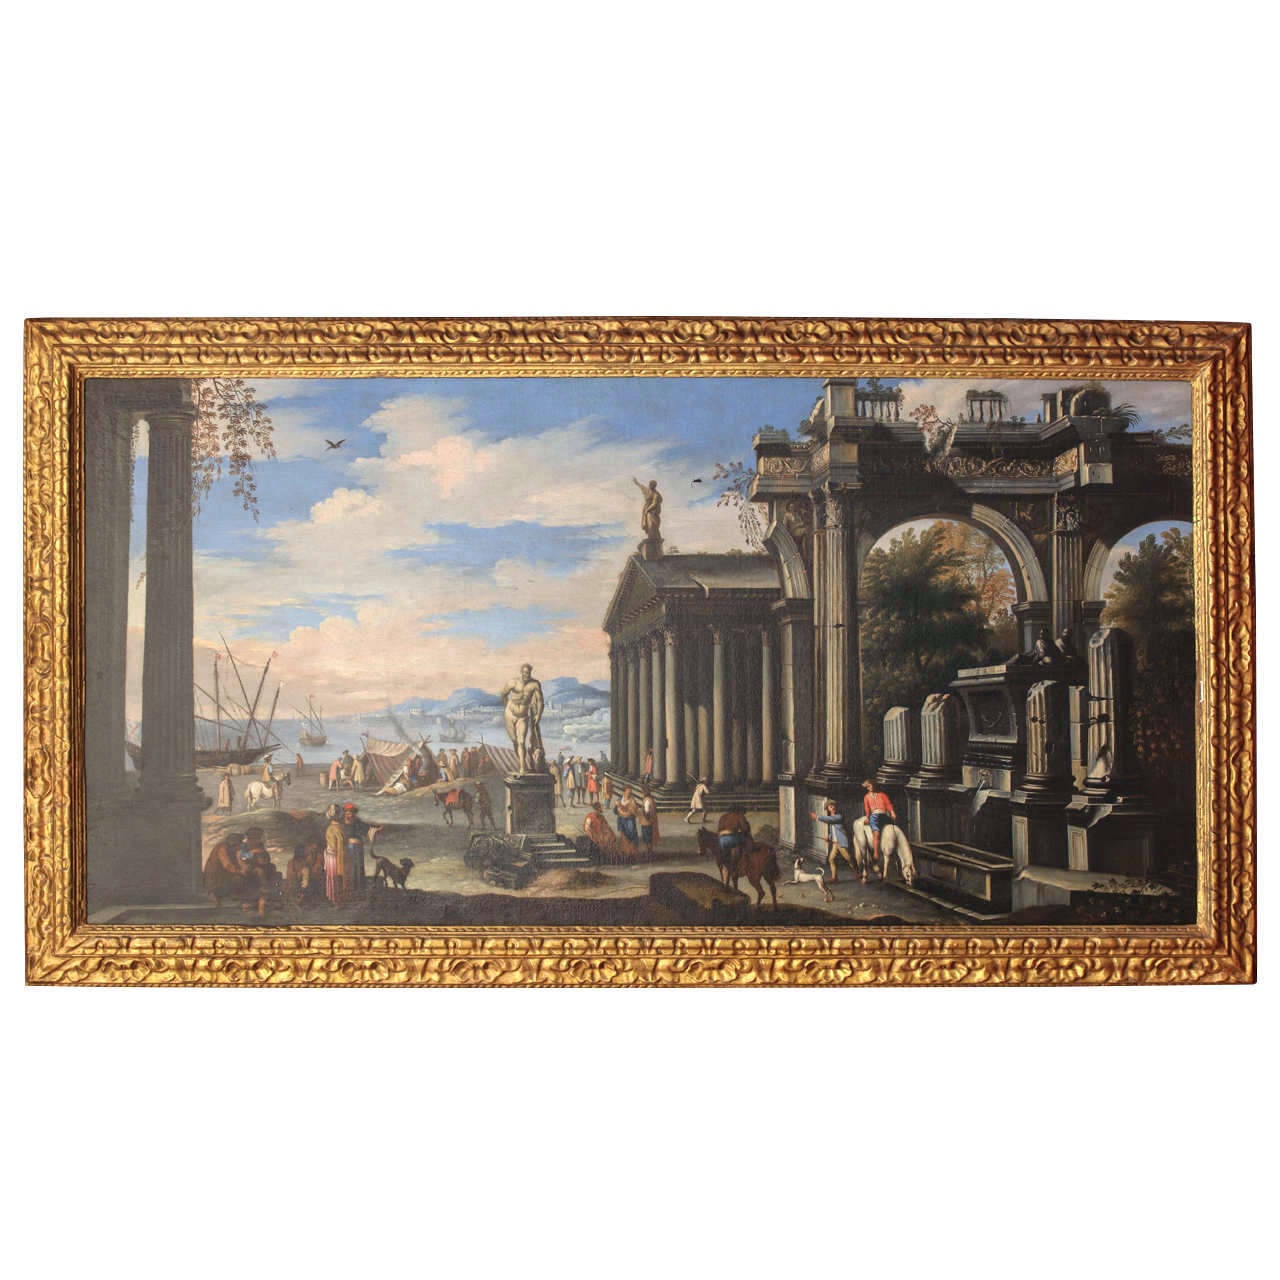 Capriccio of a Mediterranean Port and classical architectural ruins with the statue of Hercules. Oil on canvas with a carved giltwood fame.
Dimensions: 200 x 115 cm.
Artist:
Giovanni Ghisolfi (circa 1623-1683).